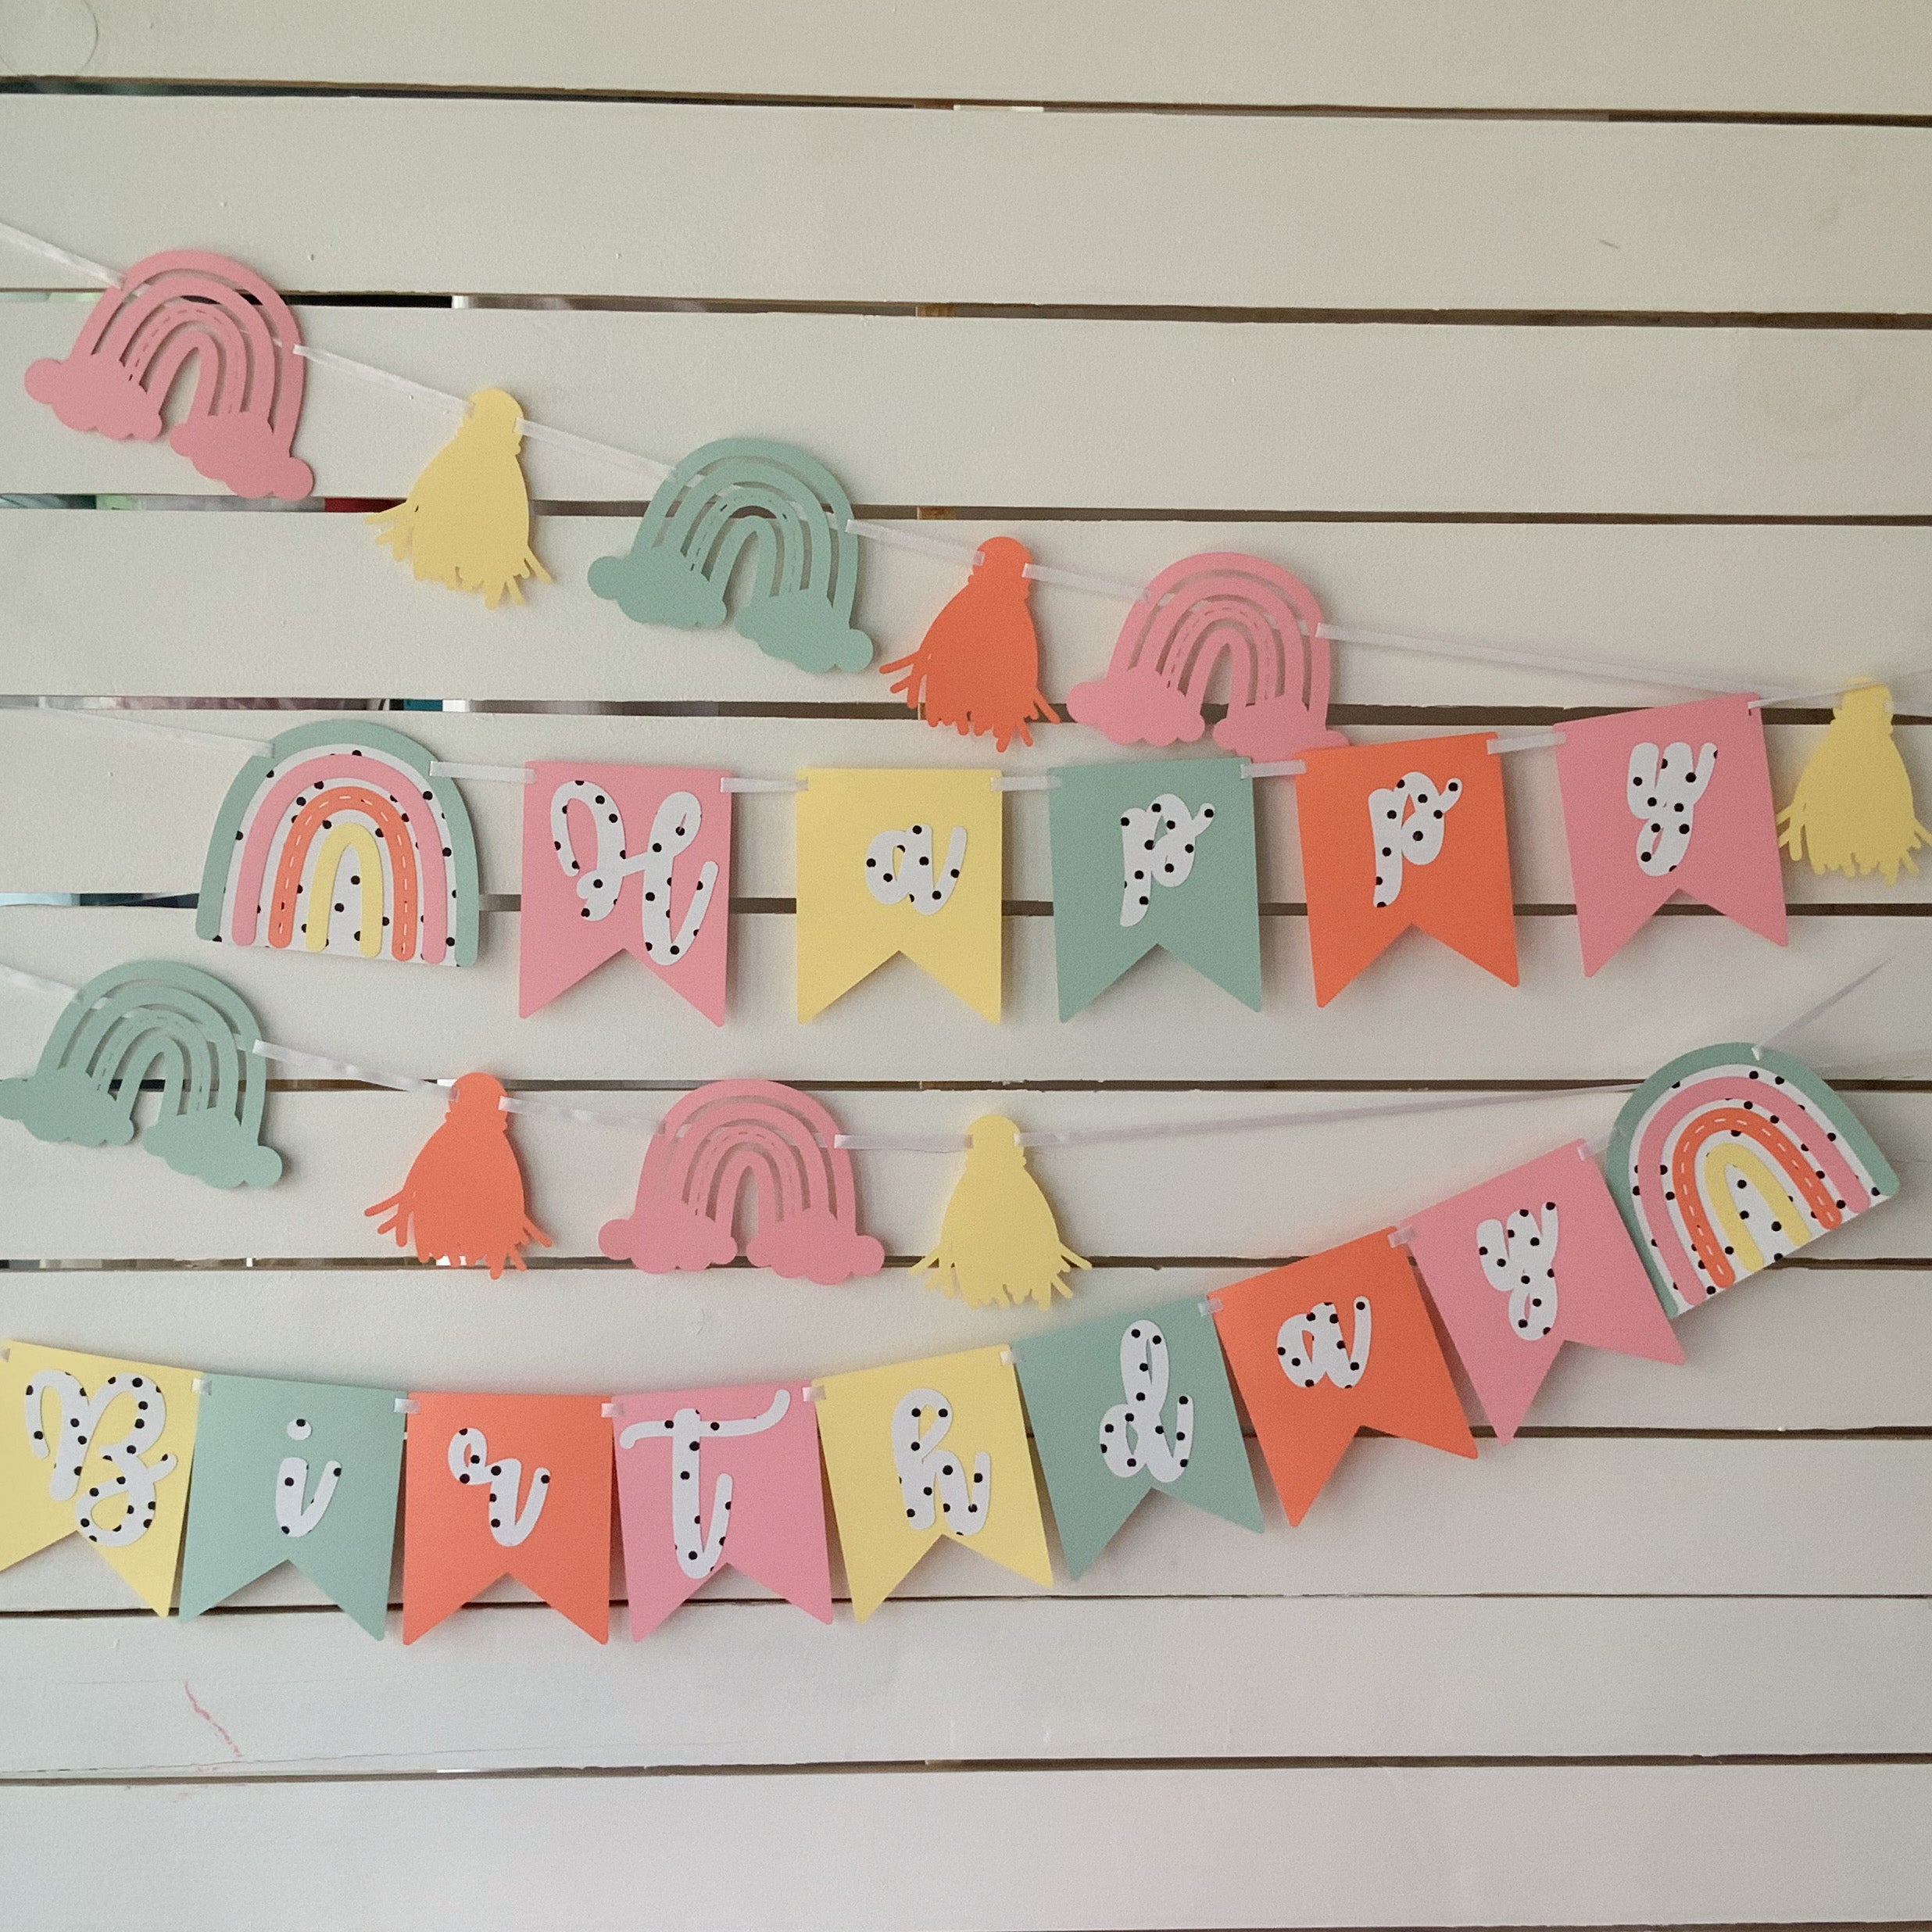 Assembled Happy Birthday Banner with Colorful Hanging Paper Fans for Pastel  Rainbow Party Decorations